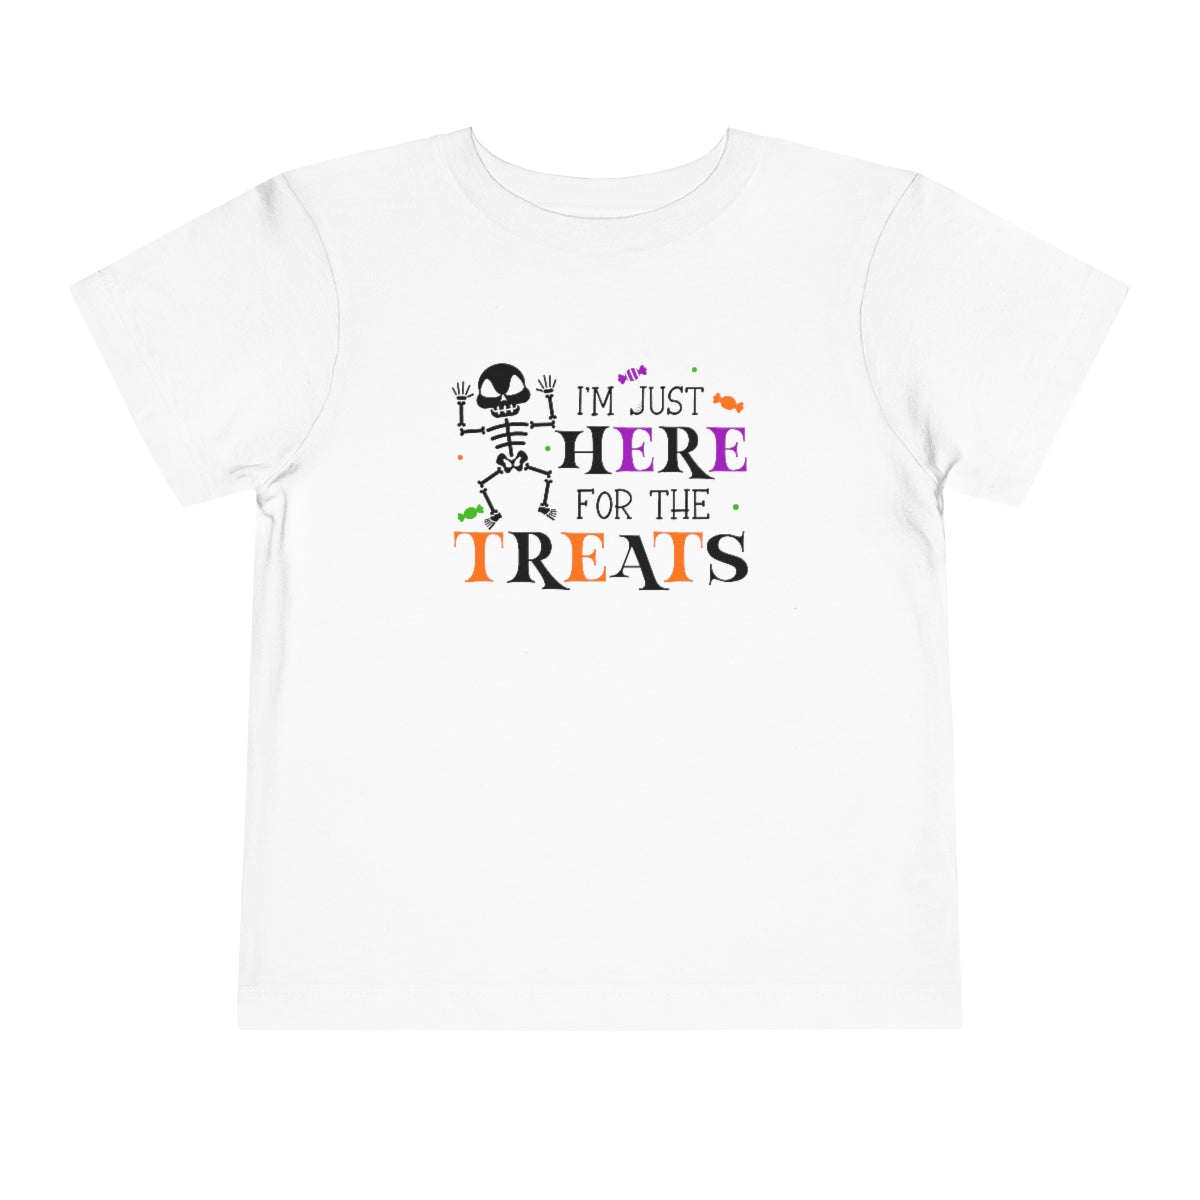 Here for the Treats Toddler Tee